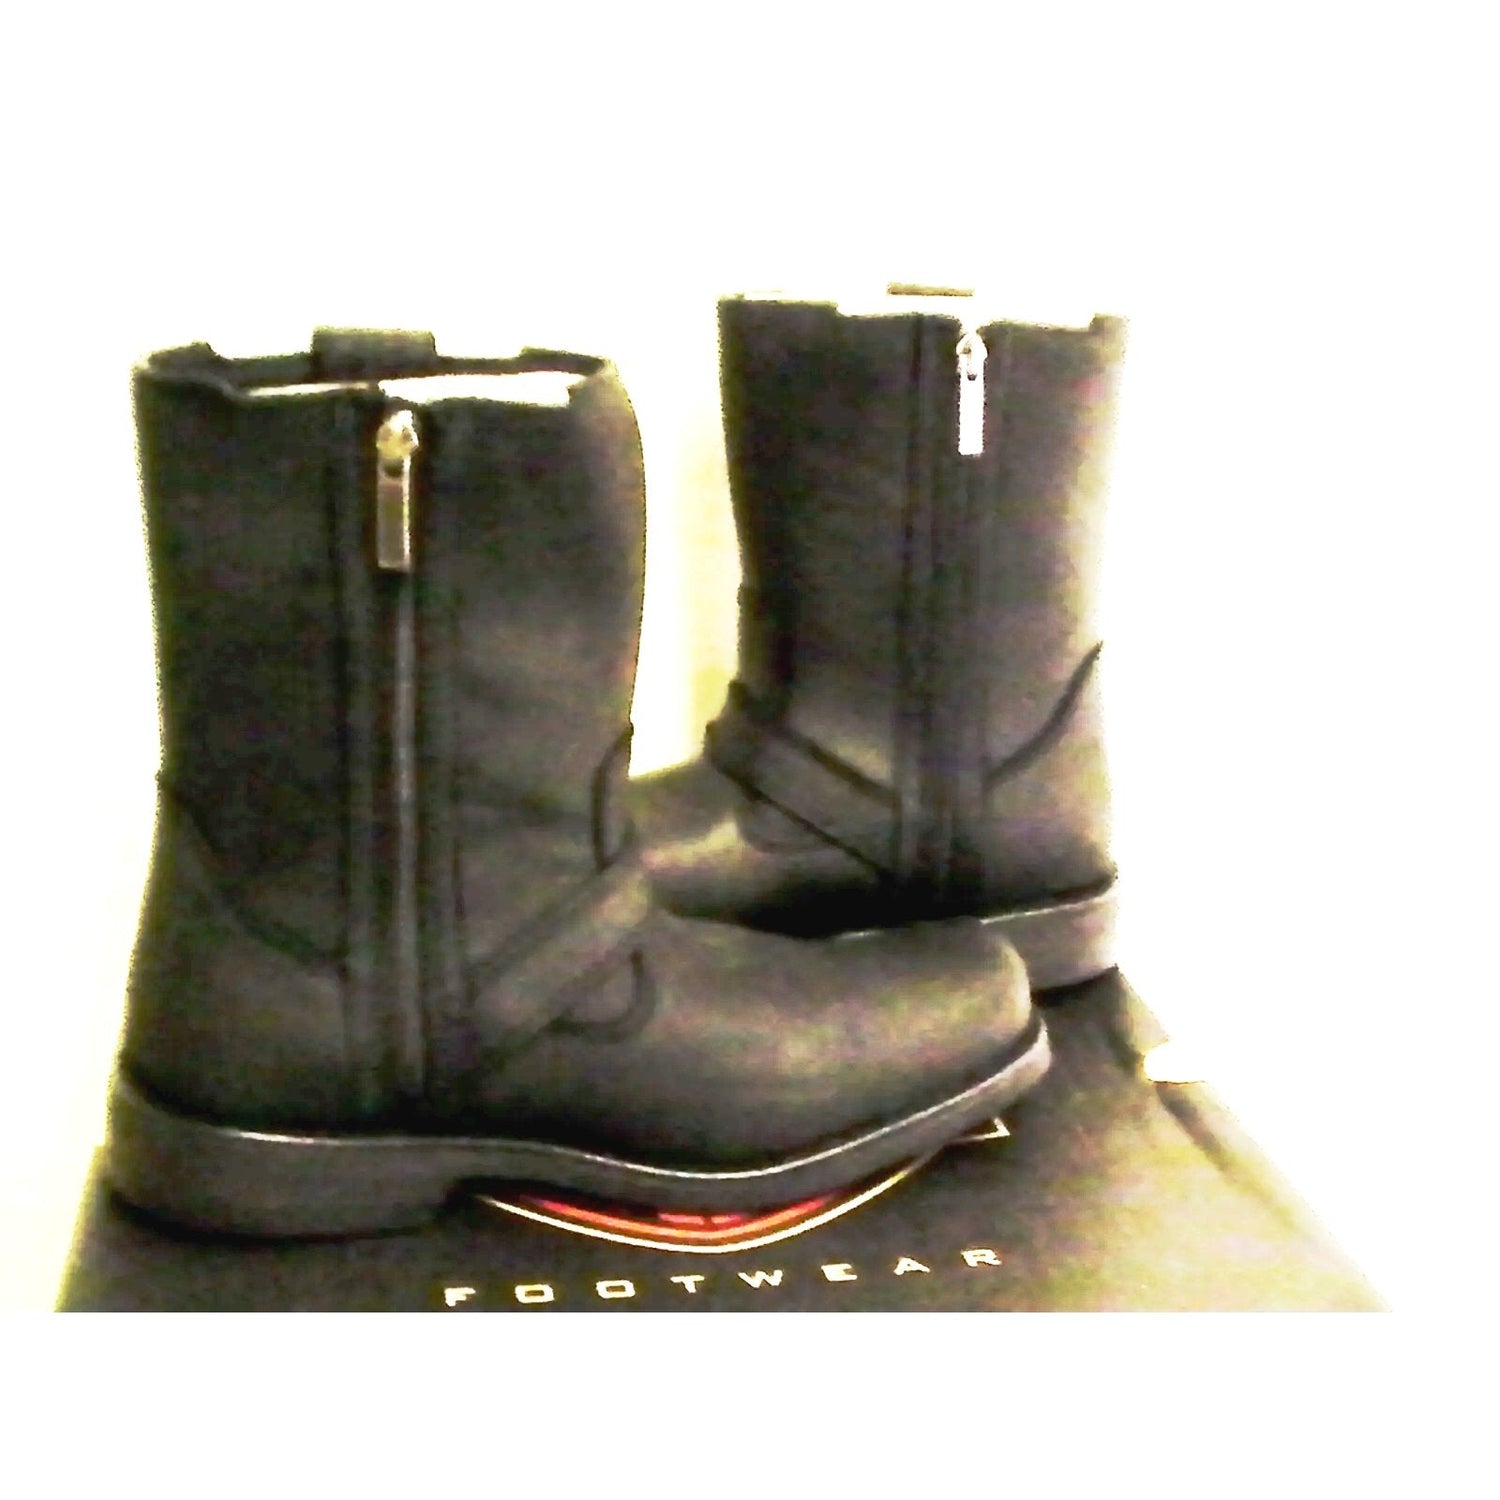 Harley davidson men riding boots troy size 10 new with box - Classic Fashion Deals